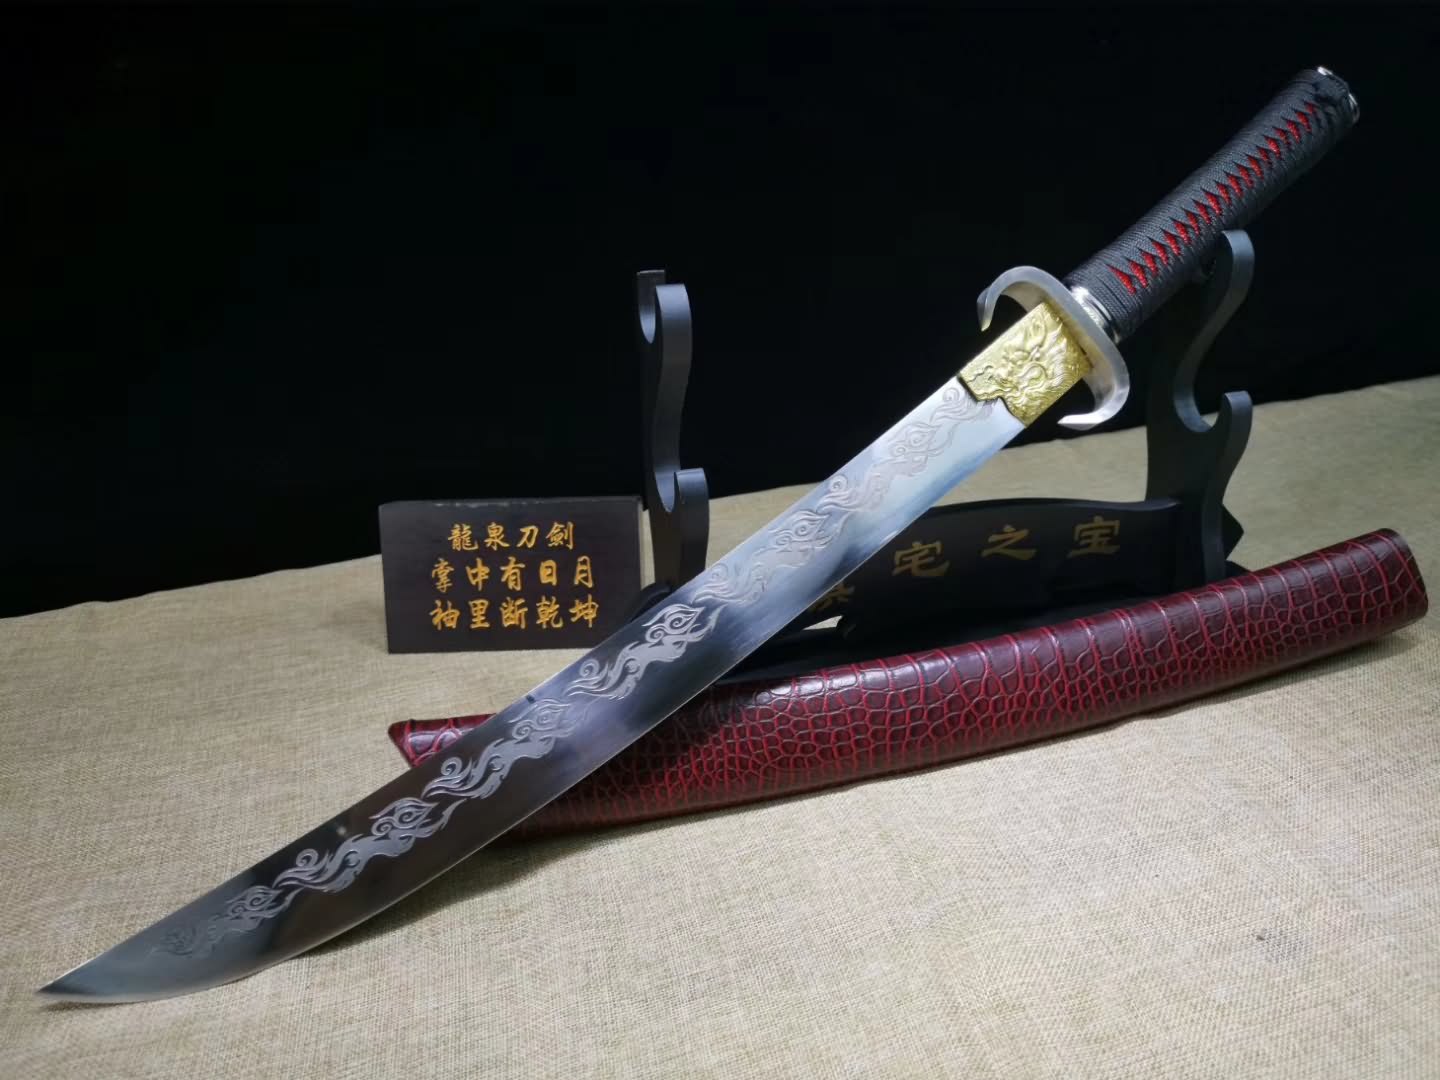 Red leather sheath broadsword,High carbon steel blade - Chinese sword shop